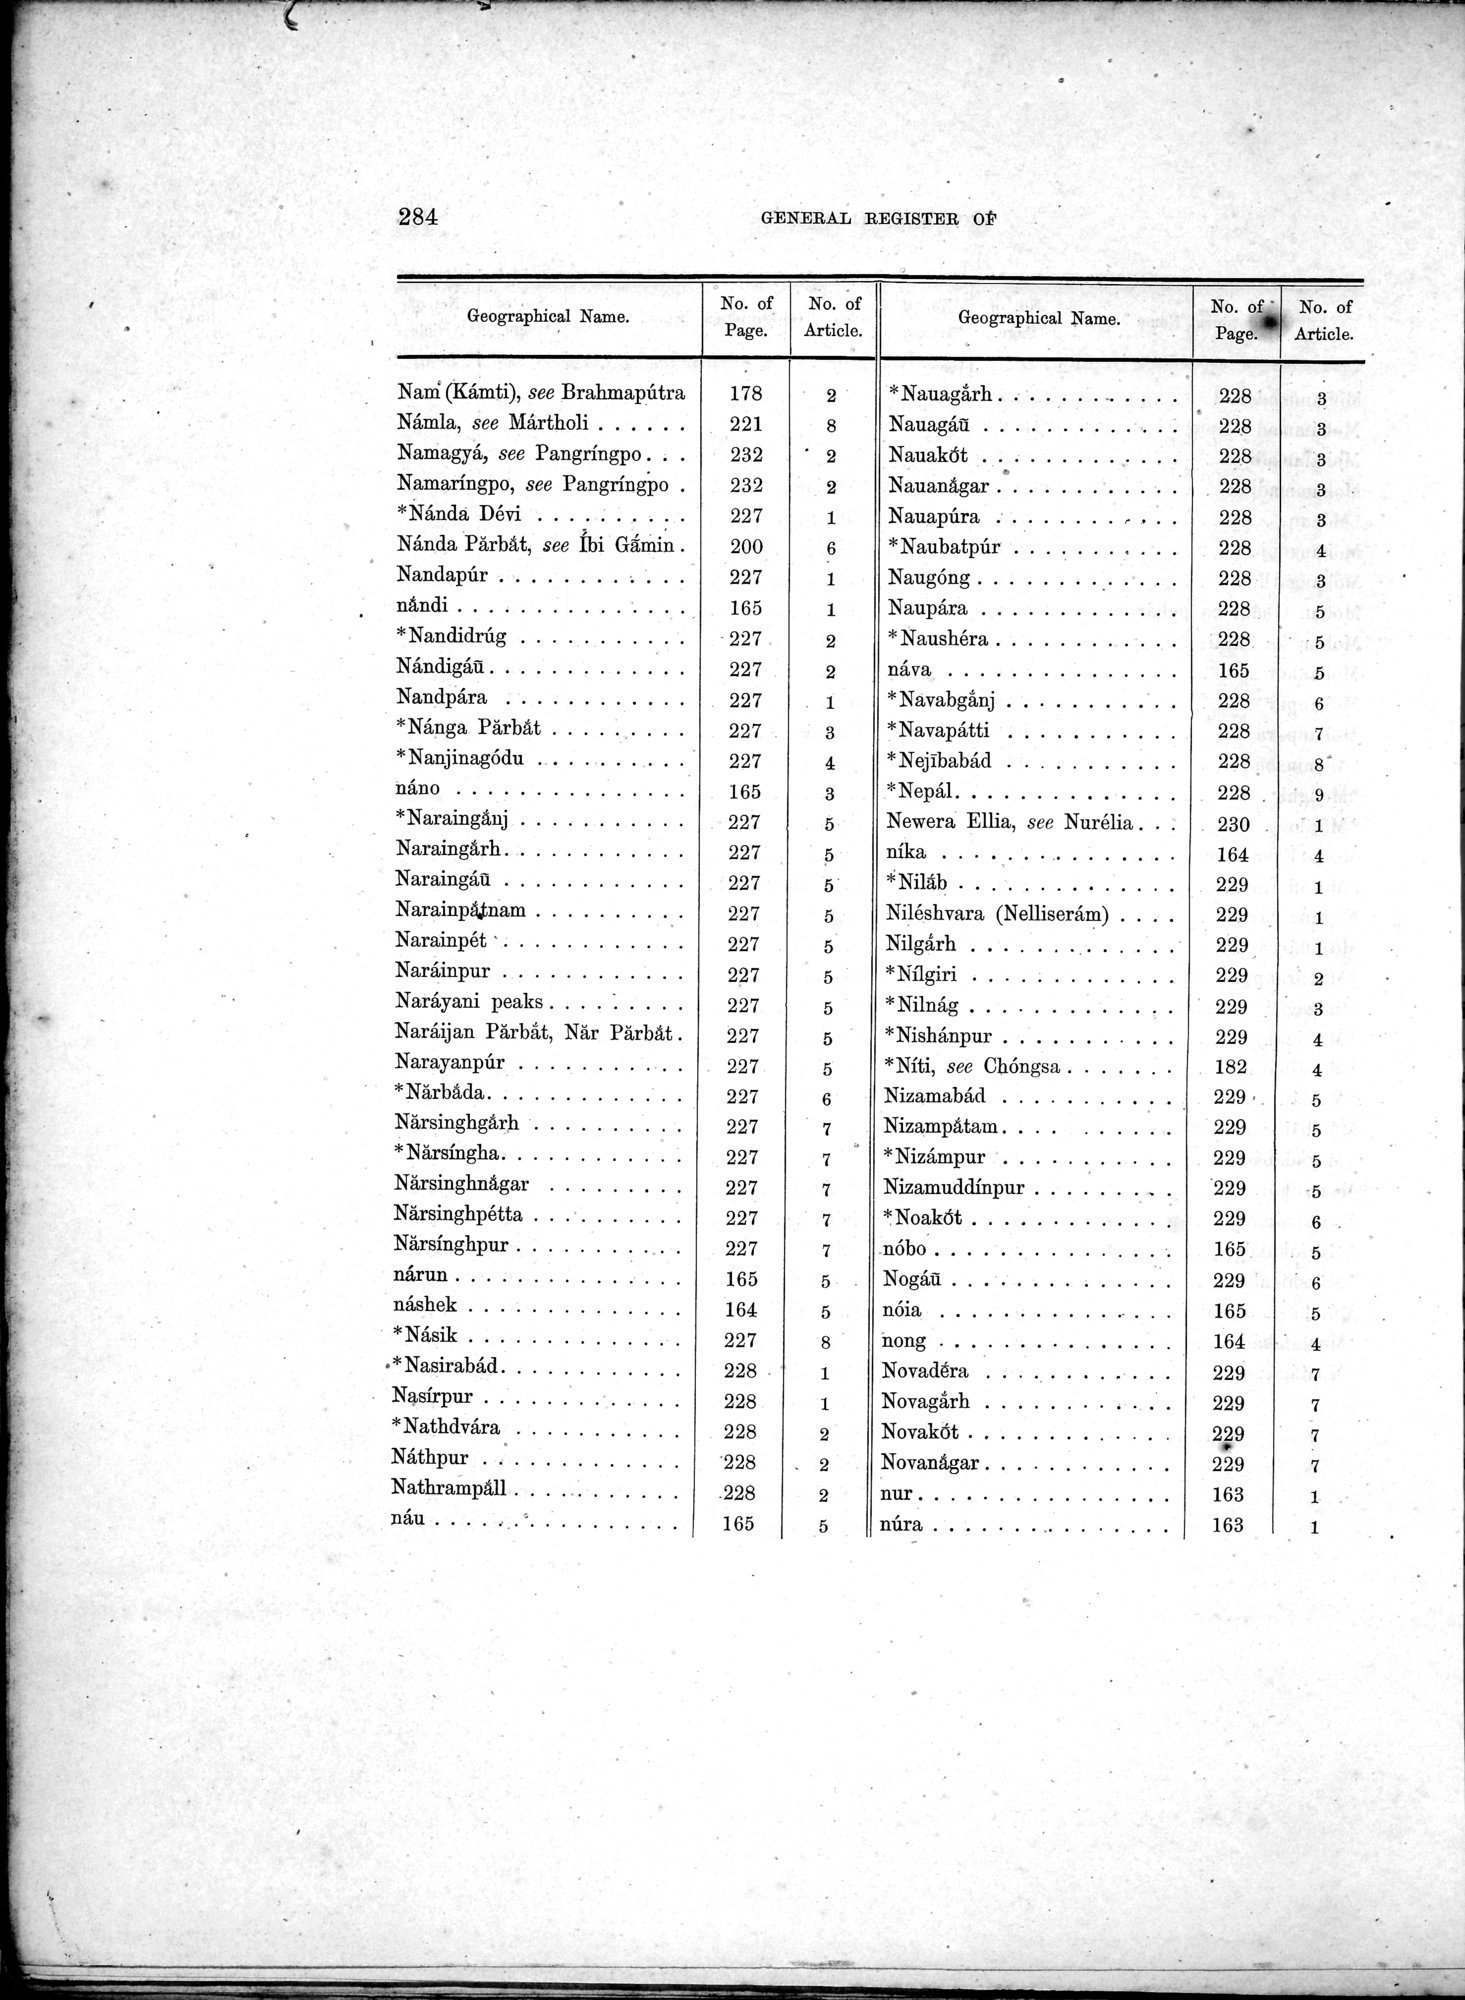 Results of a Scientific Mission to India and High Asia : vol.3 / Page 316 (Grayscale High Resolution Image)